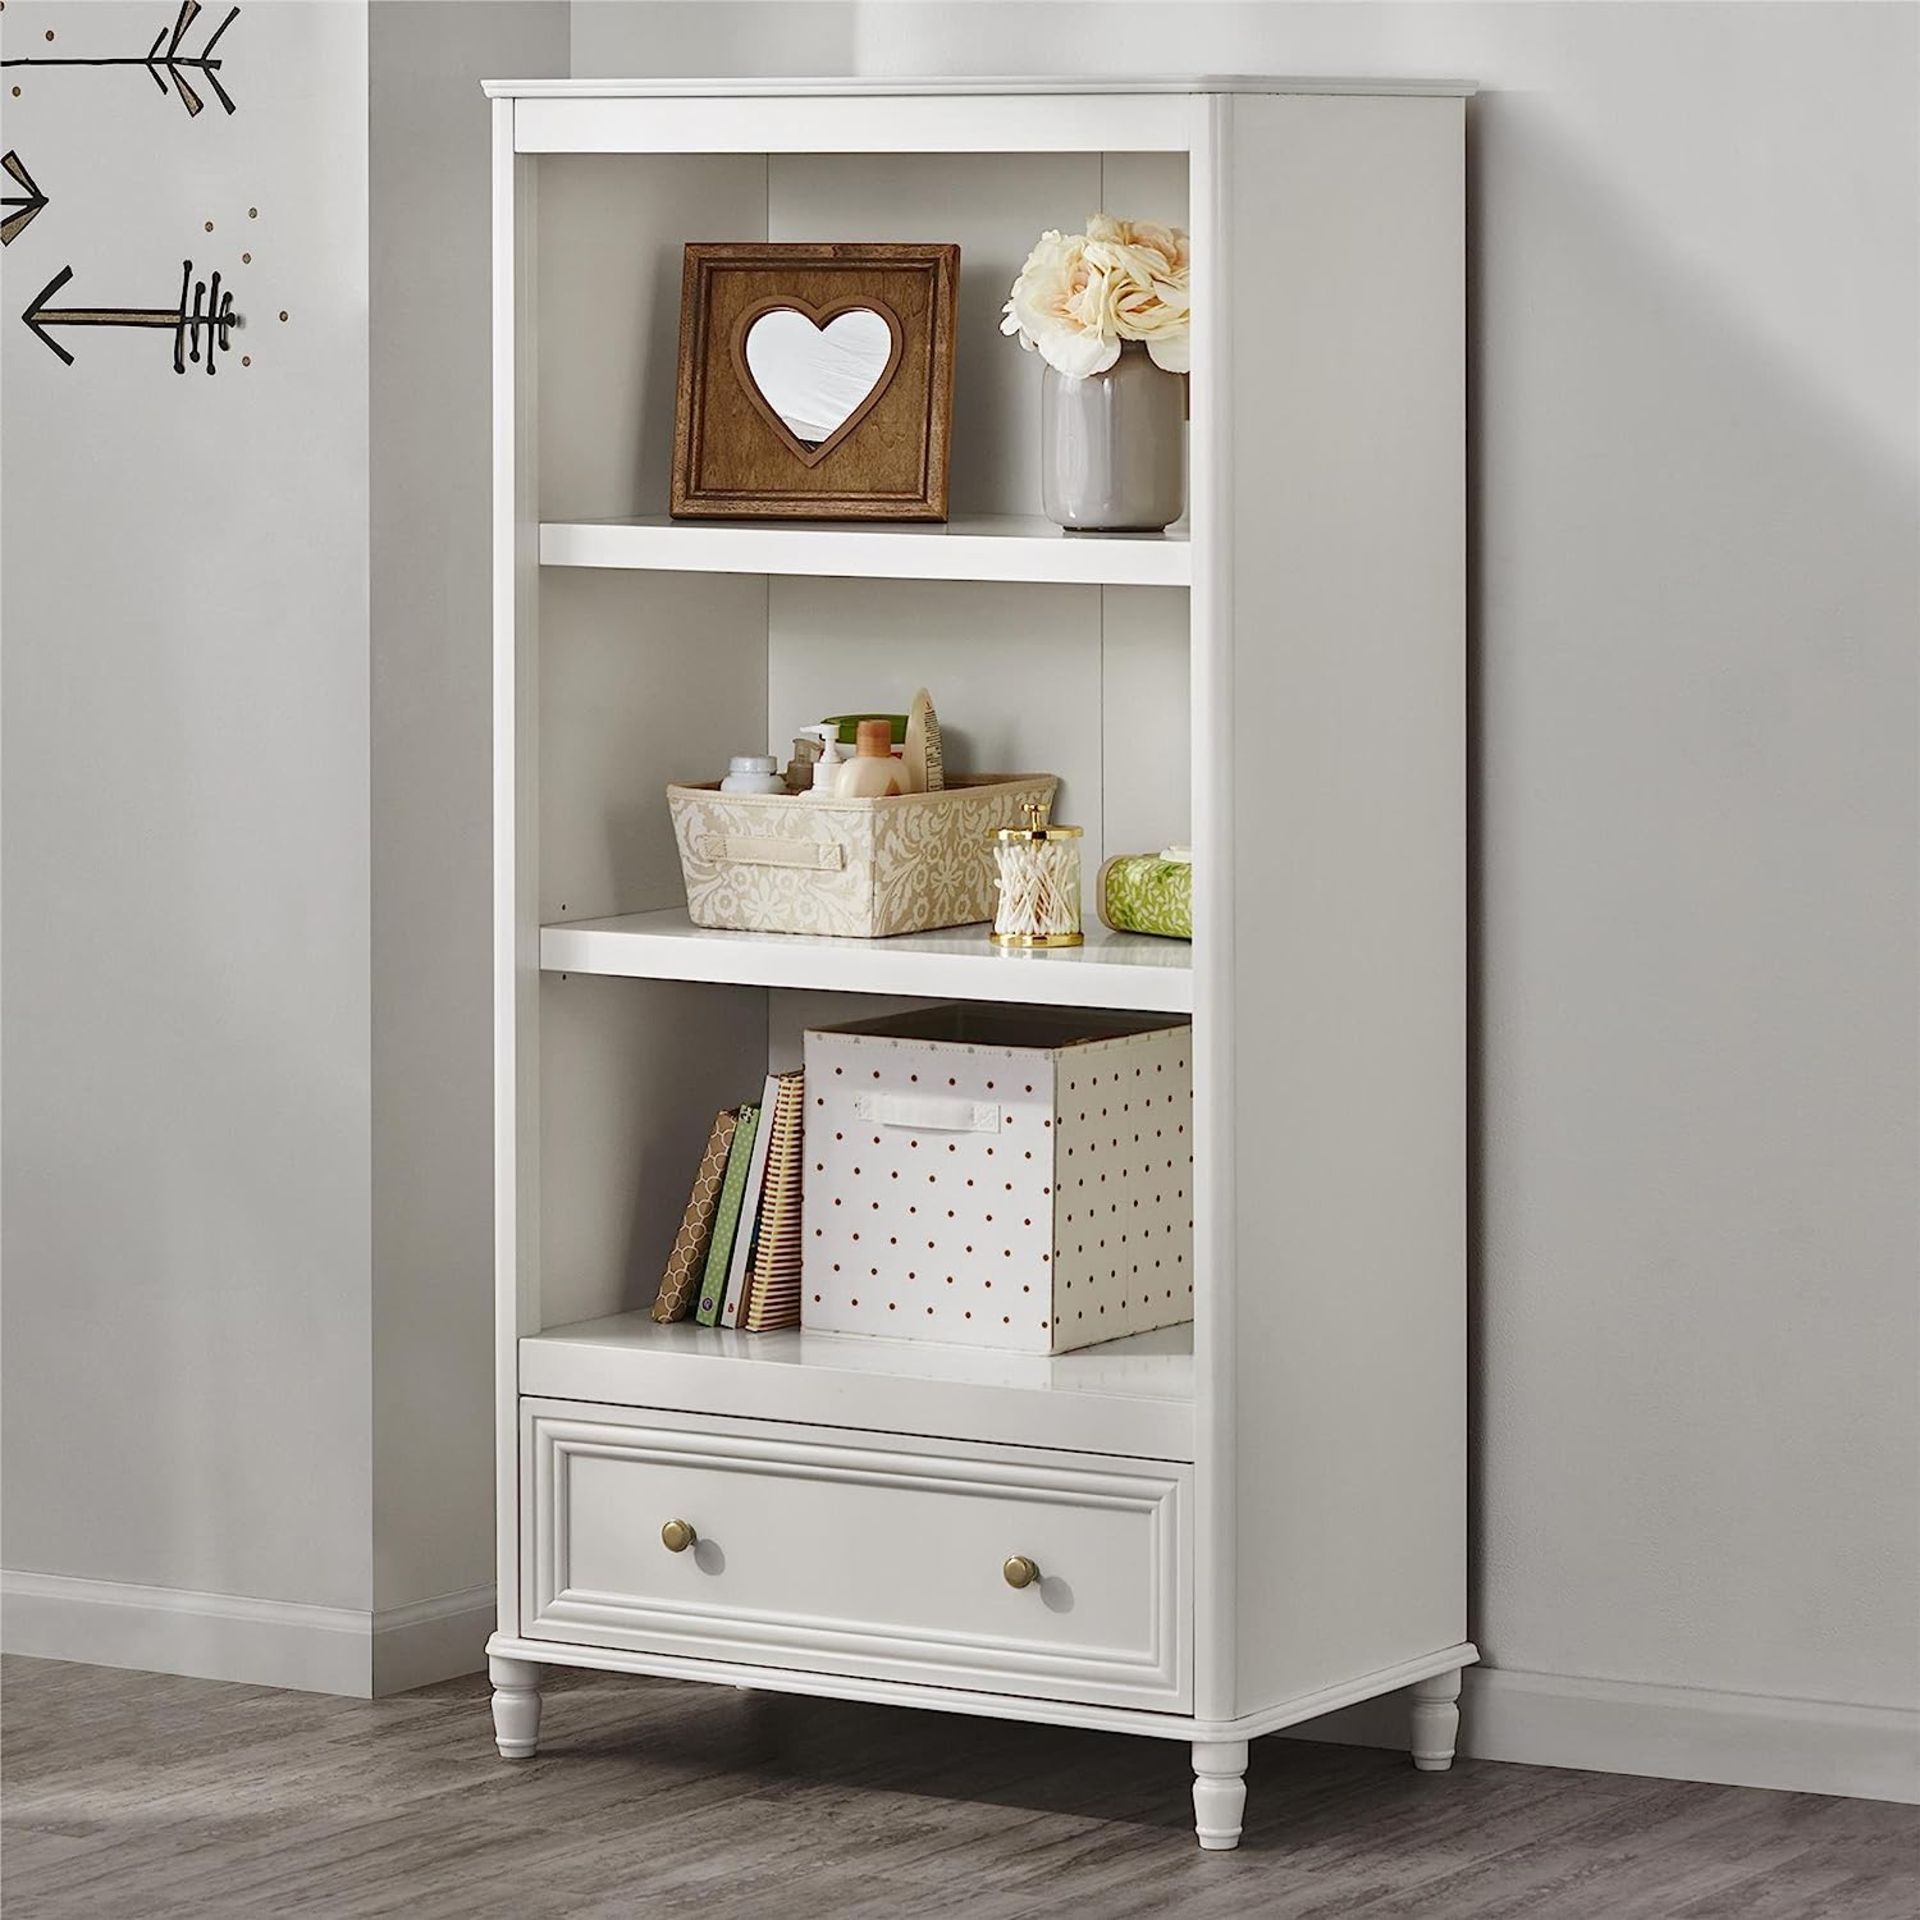 BRAND NEW CREAM PIPER LUXURY BOOKCASE WITH DRAWER RRP £219 (DB) 6857196BRUUK. Keep your favorite